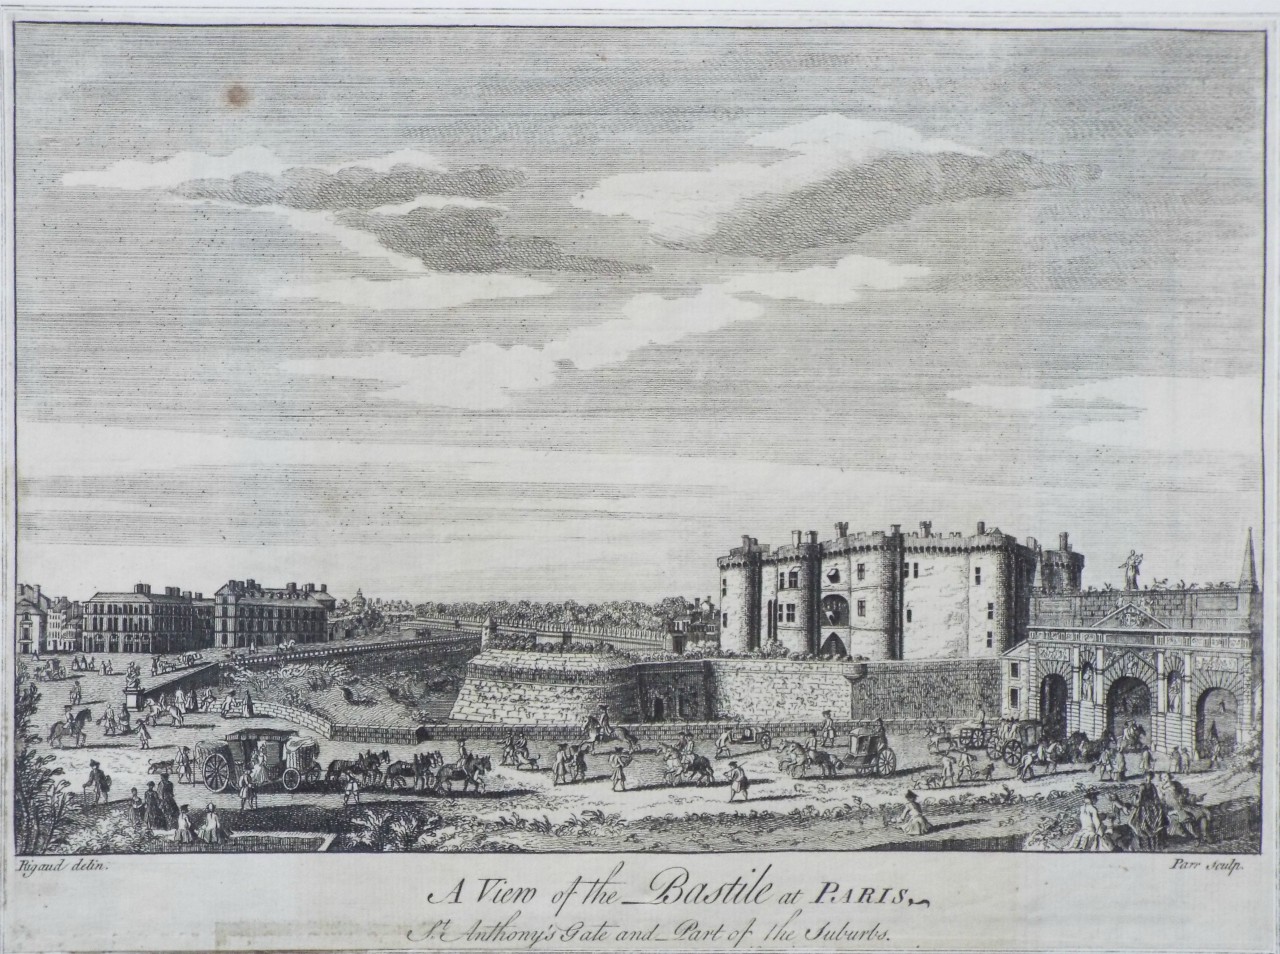 Print - A View of the Bastile at Paris, St. Anthony's Gate and Part of the Suburbs. - 